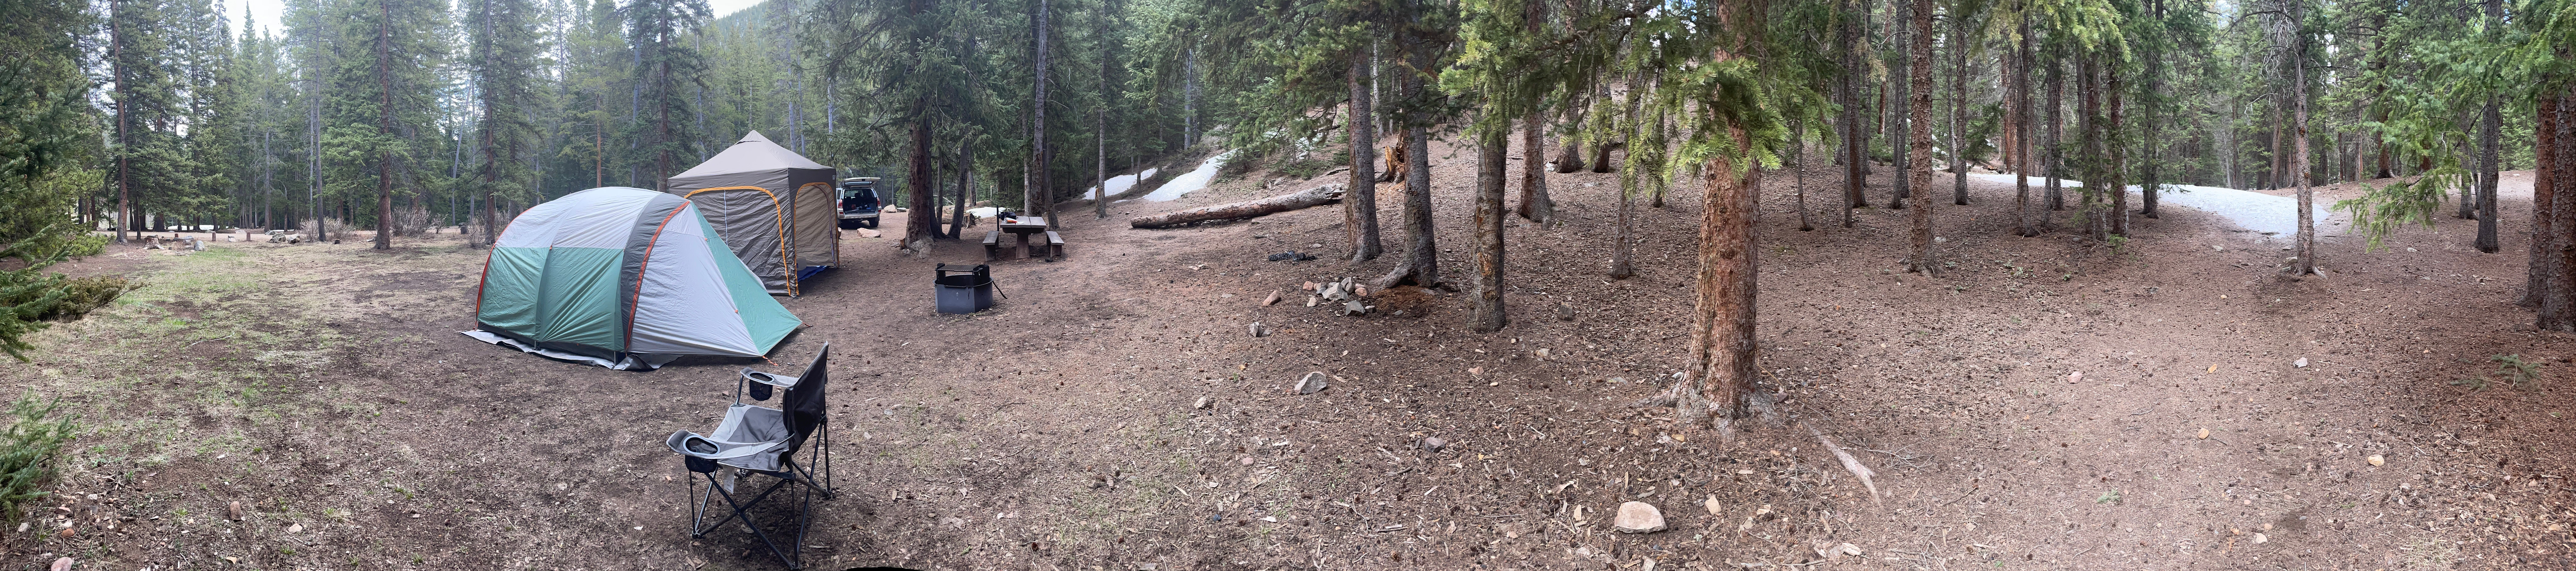 Camper submitted image from Handcart Campground - 1